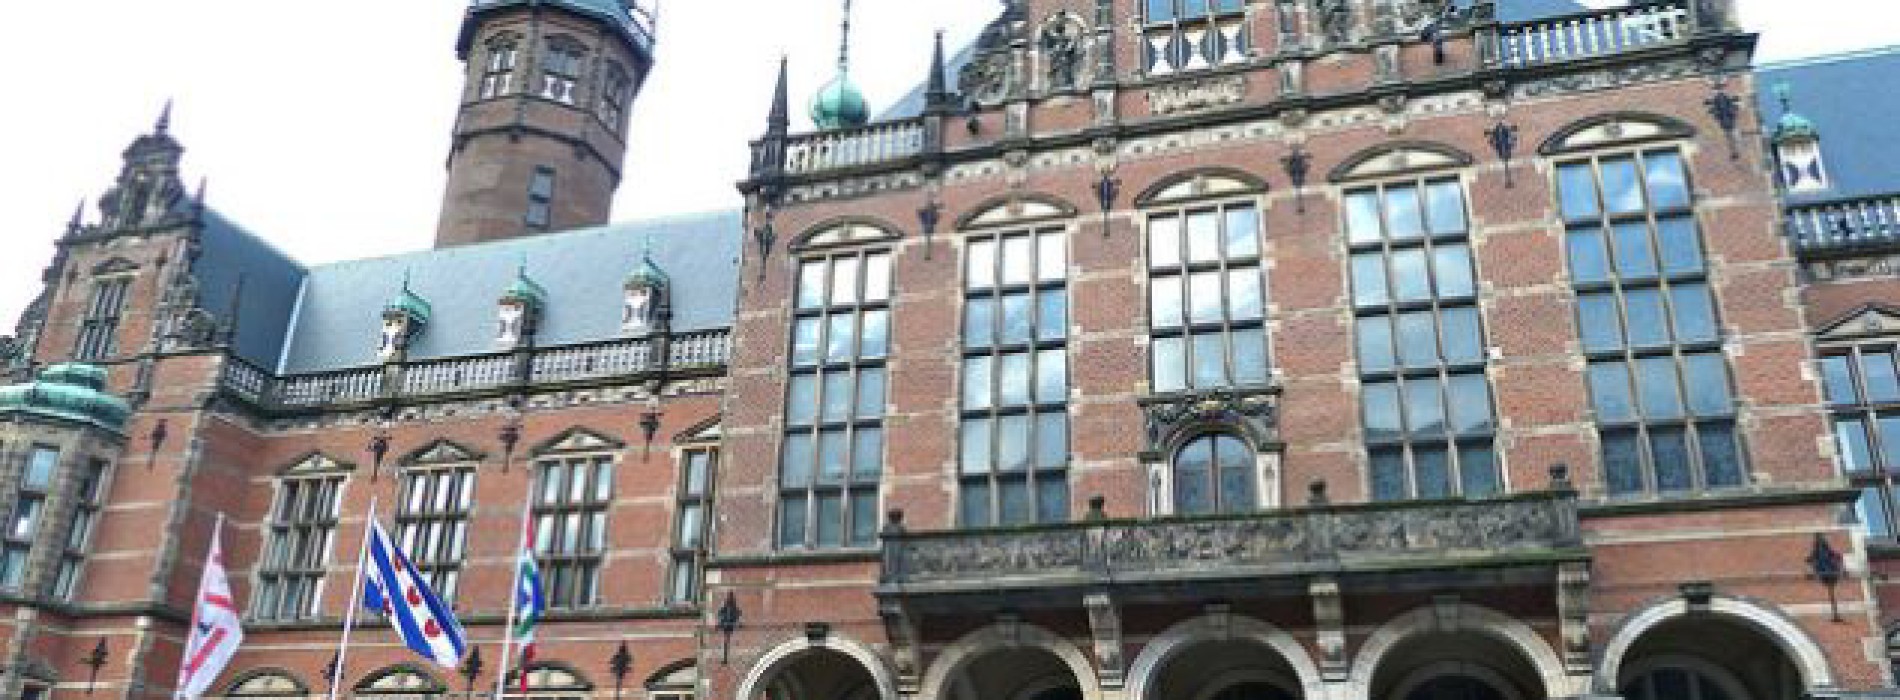 Call for Applications History of Education Doctoral Summer School – Groningen 9-12 June 2016